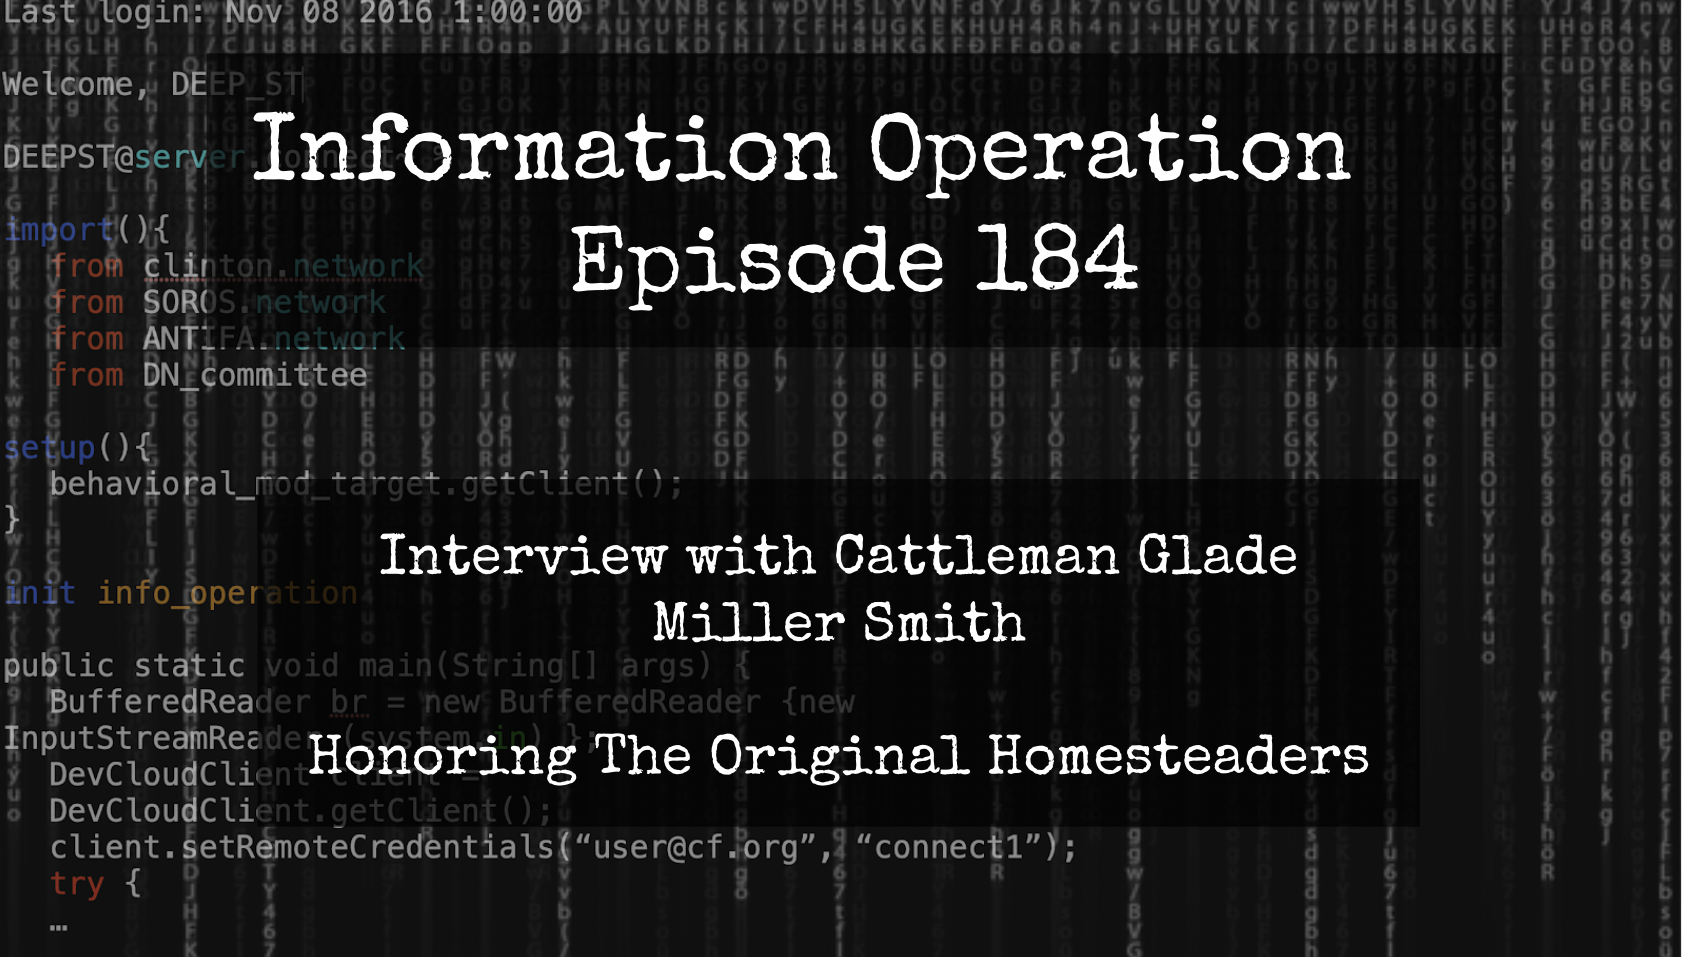 IO Episode 184 - Glade Miller Smith - Honoring The Early Homesteaders